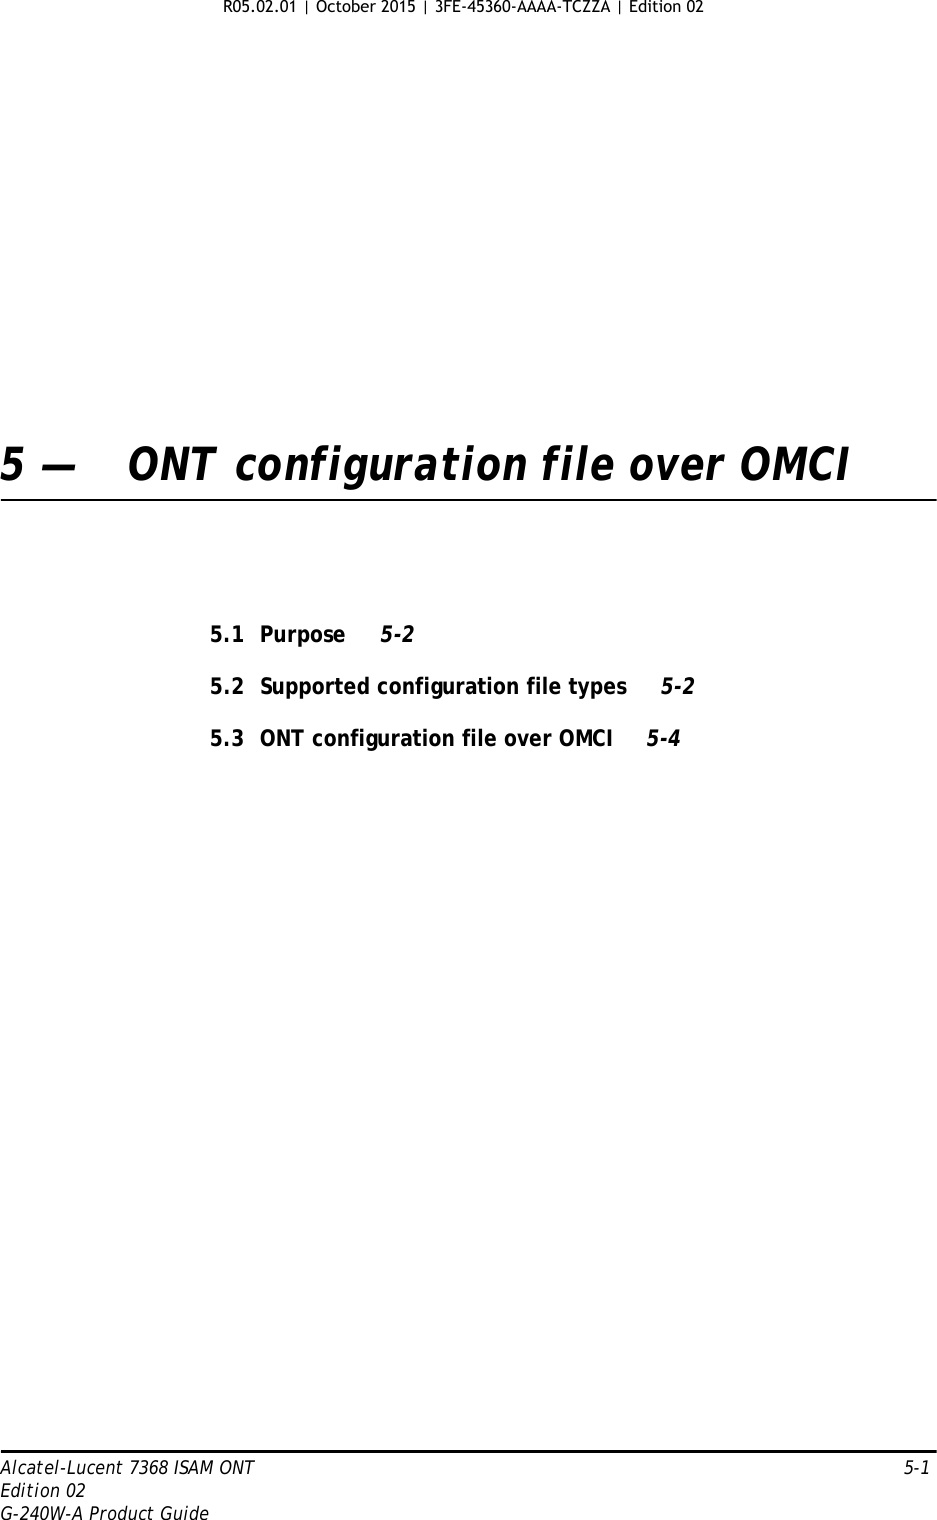 Alcatel-Lucent 7368 ISAM ONT   5-1Edition 02G-240W-A Product Guide5 — ONT configuration file over OMCI5.1 Purpose 5-25.2 Supported configuration file types 5-25.3 ONT configuration file over OMCI 5-4 R05.02.01 | October 2015 | 3FE-45360-AAAA-TCZZA | Edition 02 